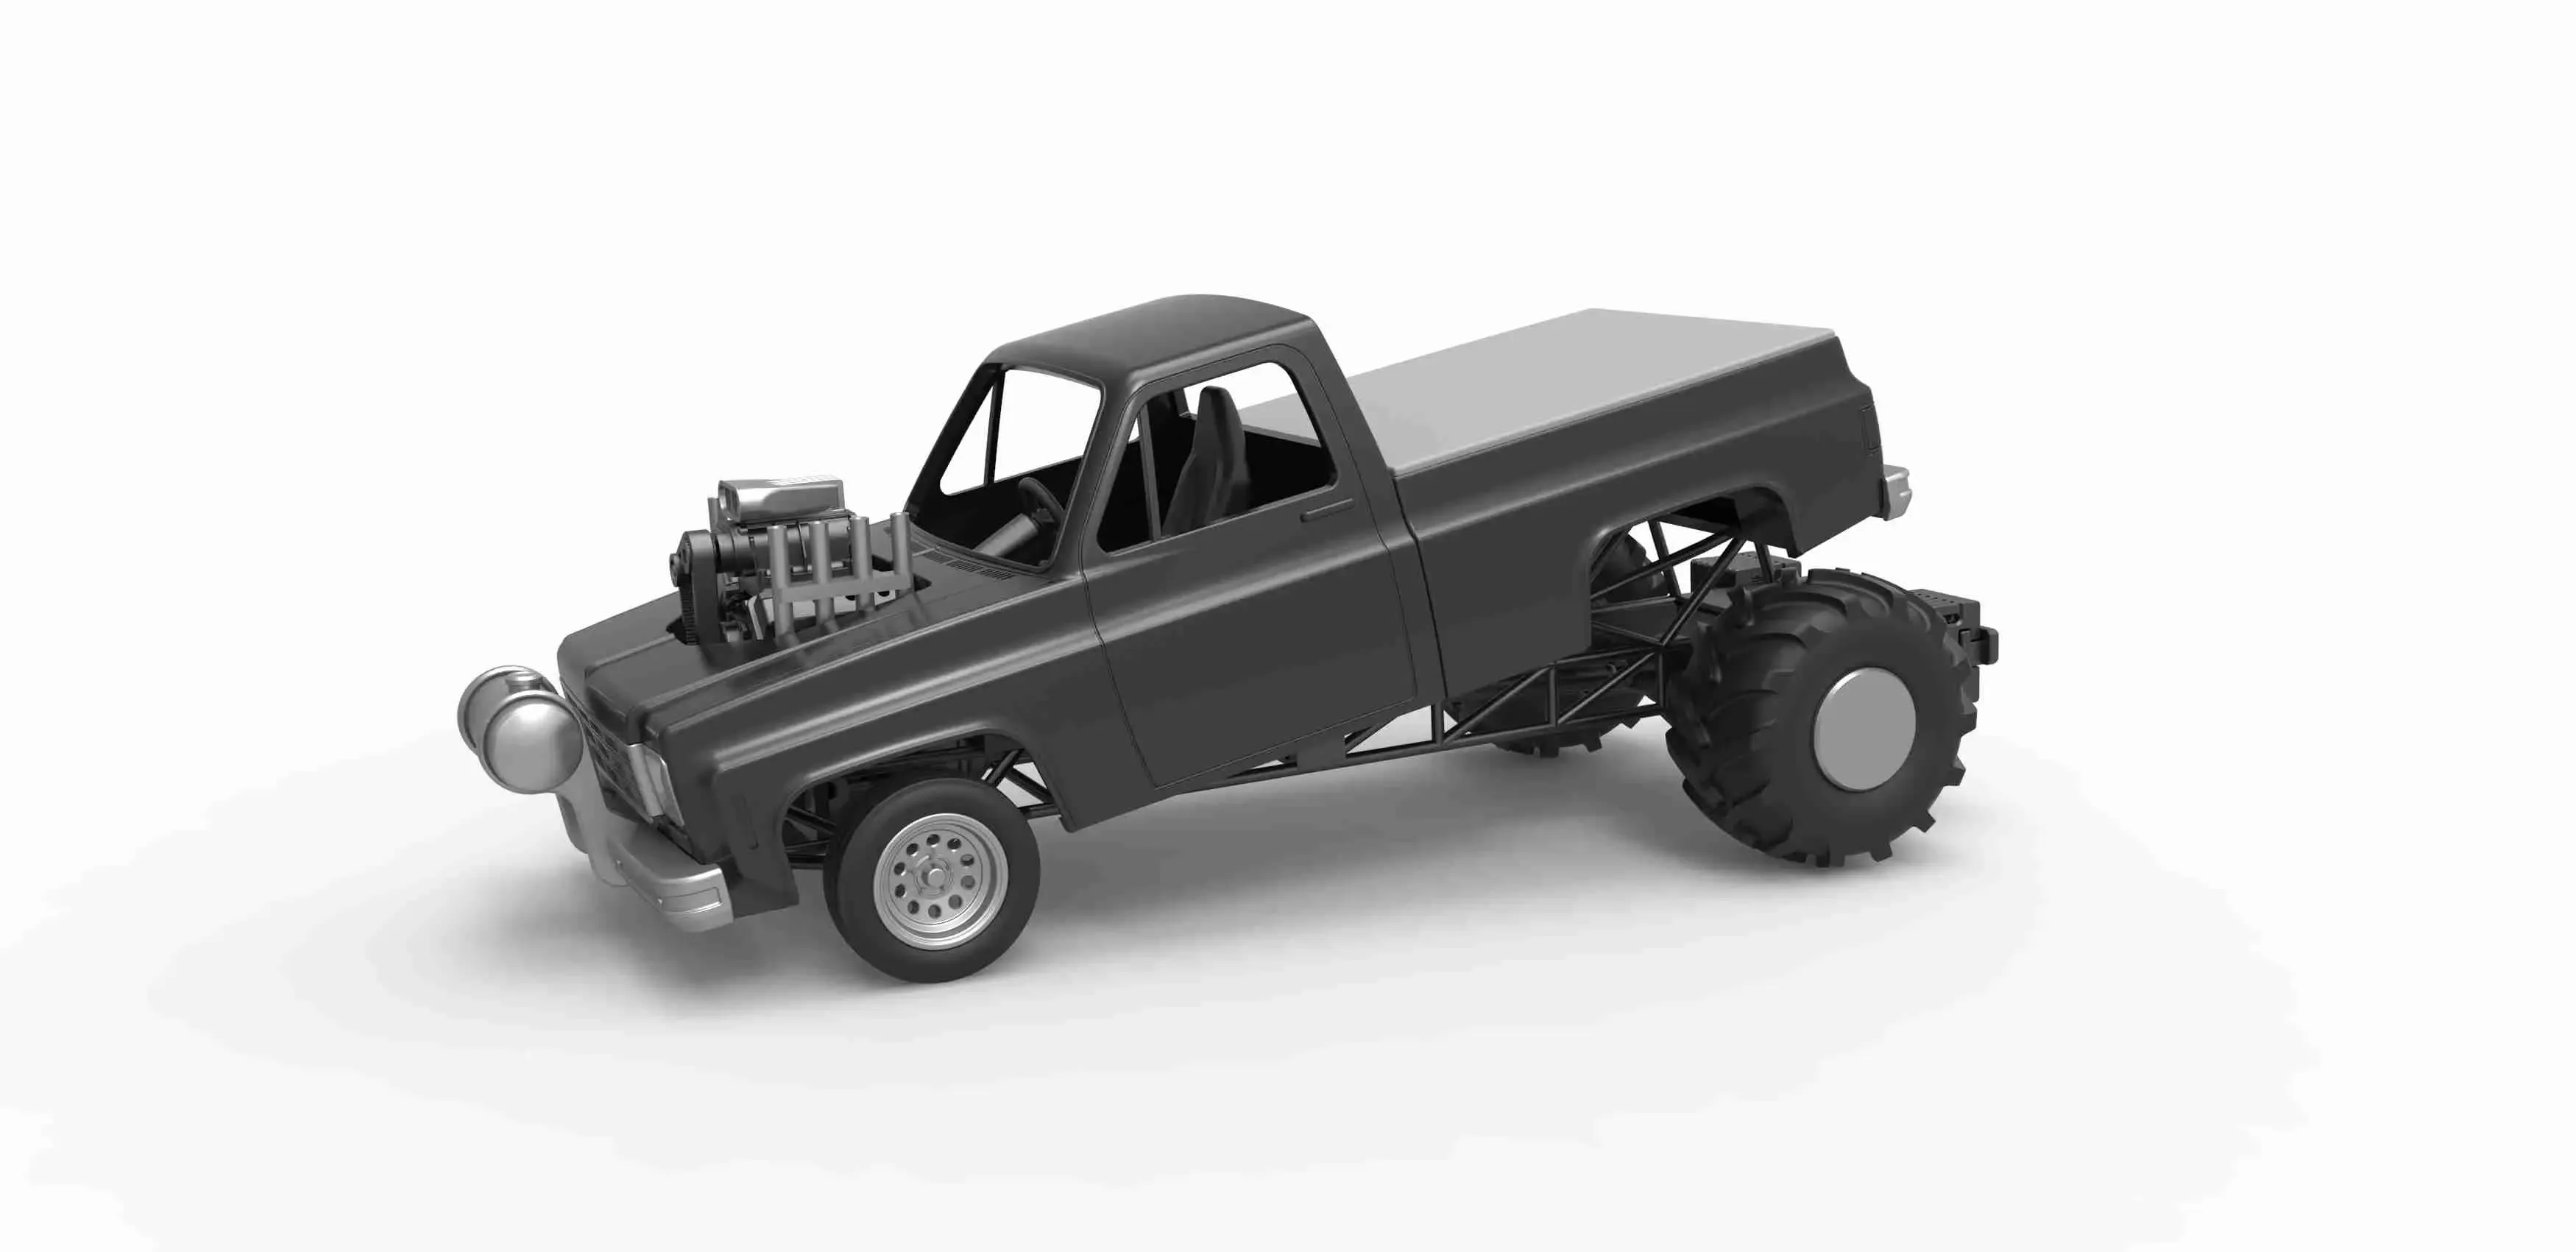 Old school pulling truck 2wd Scale 1:25